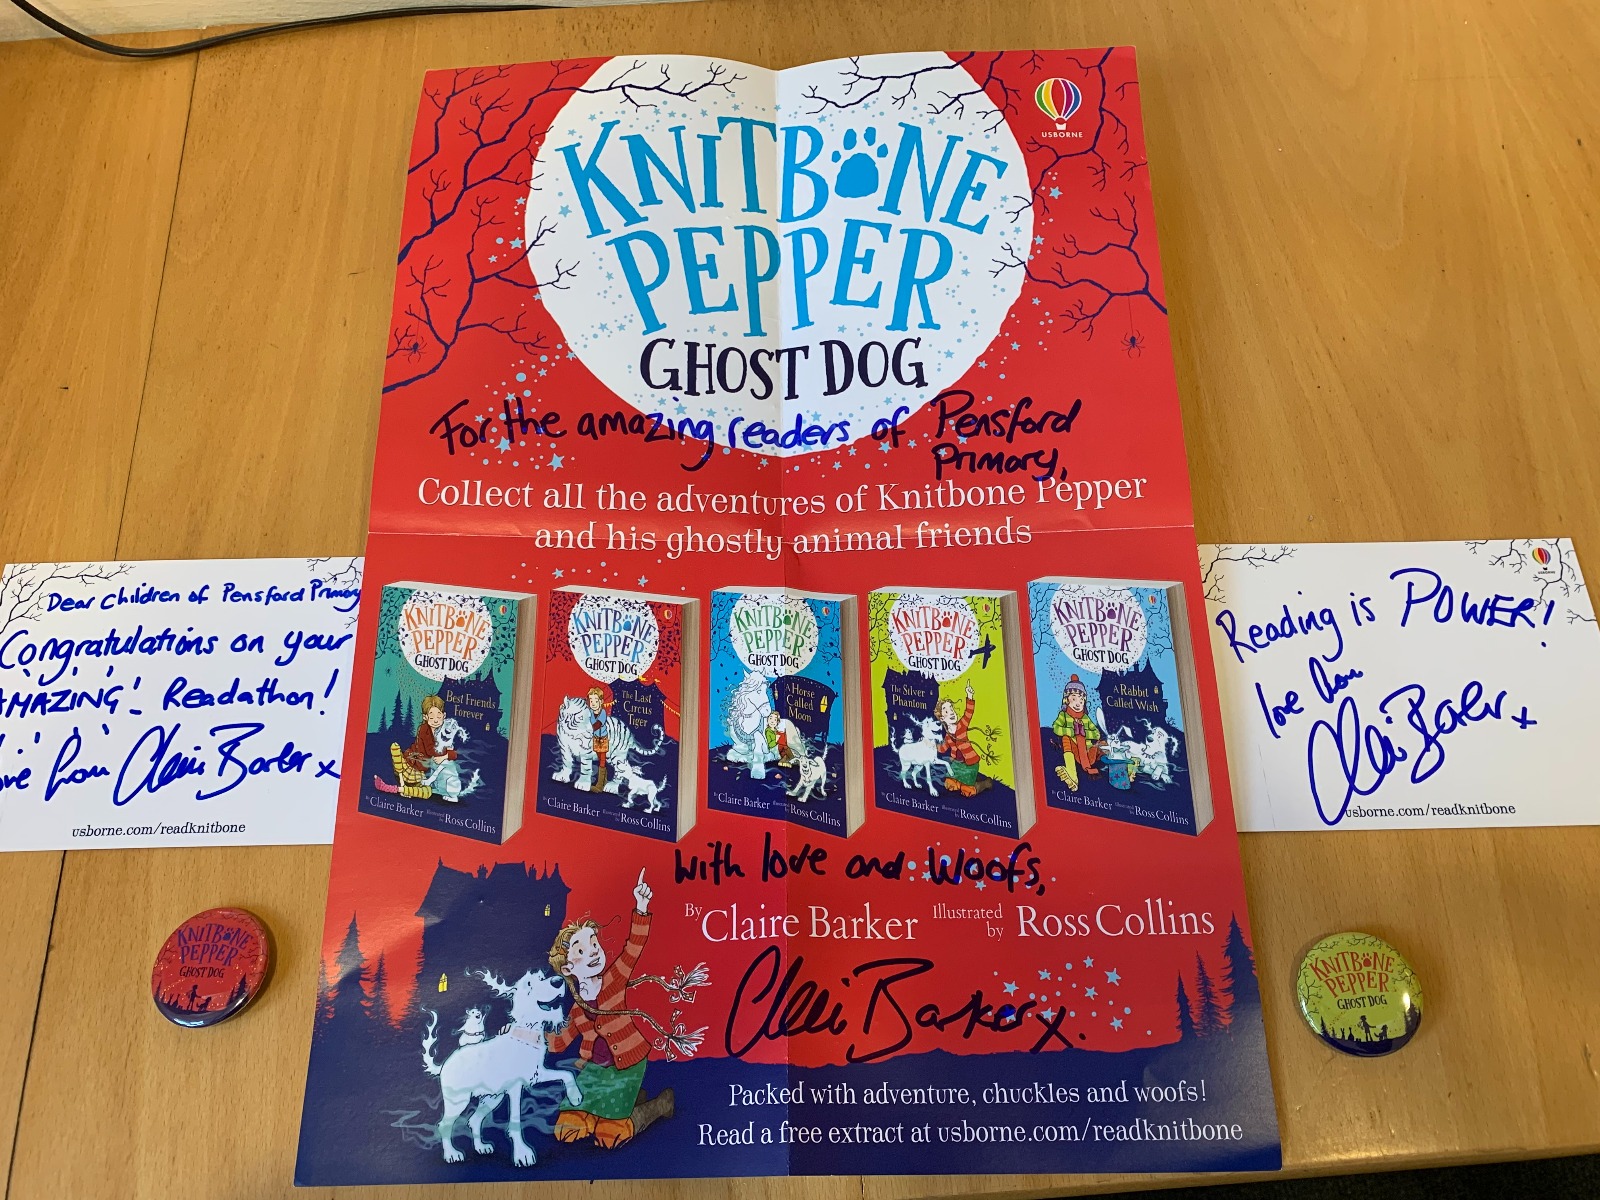 An extra special congratulations to Pensford Primary School from author Claire Barker, author of the Knitbone Pepper: Ghost Dog series